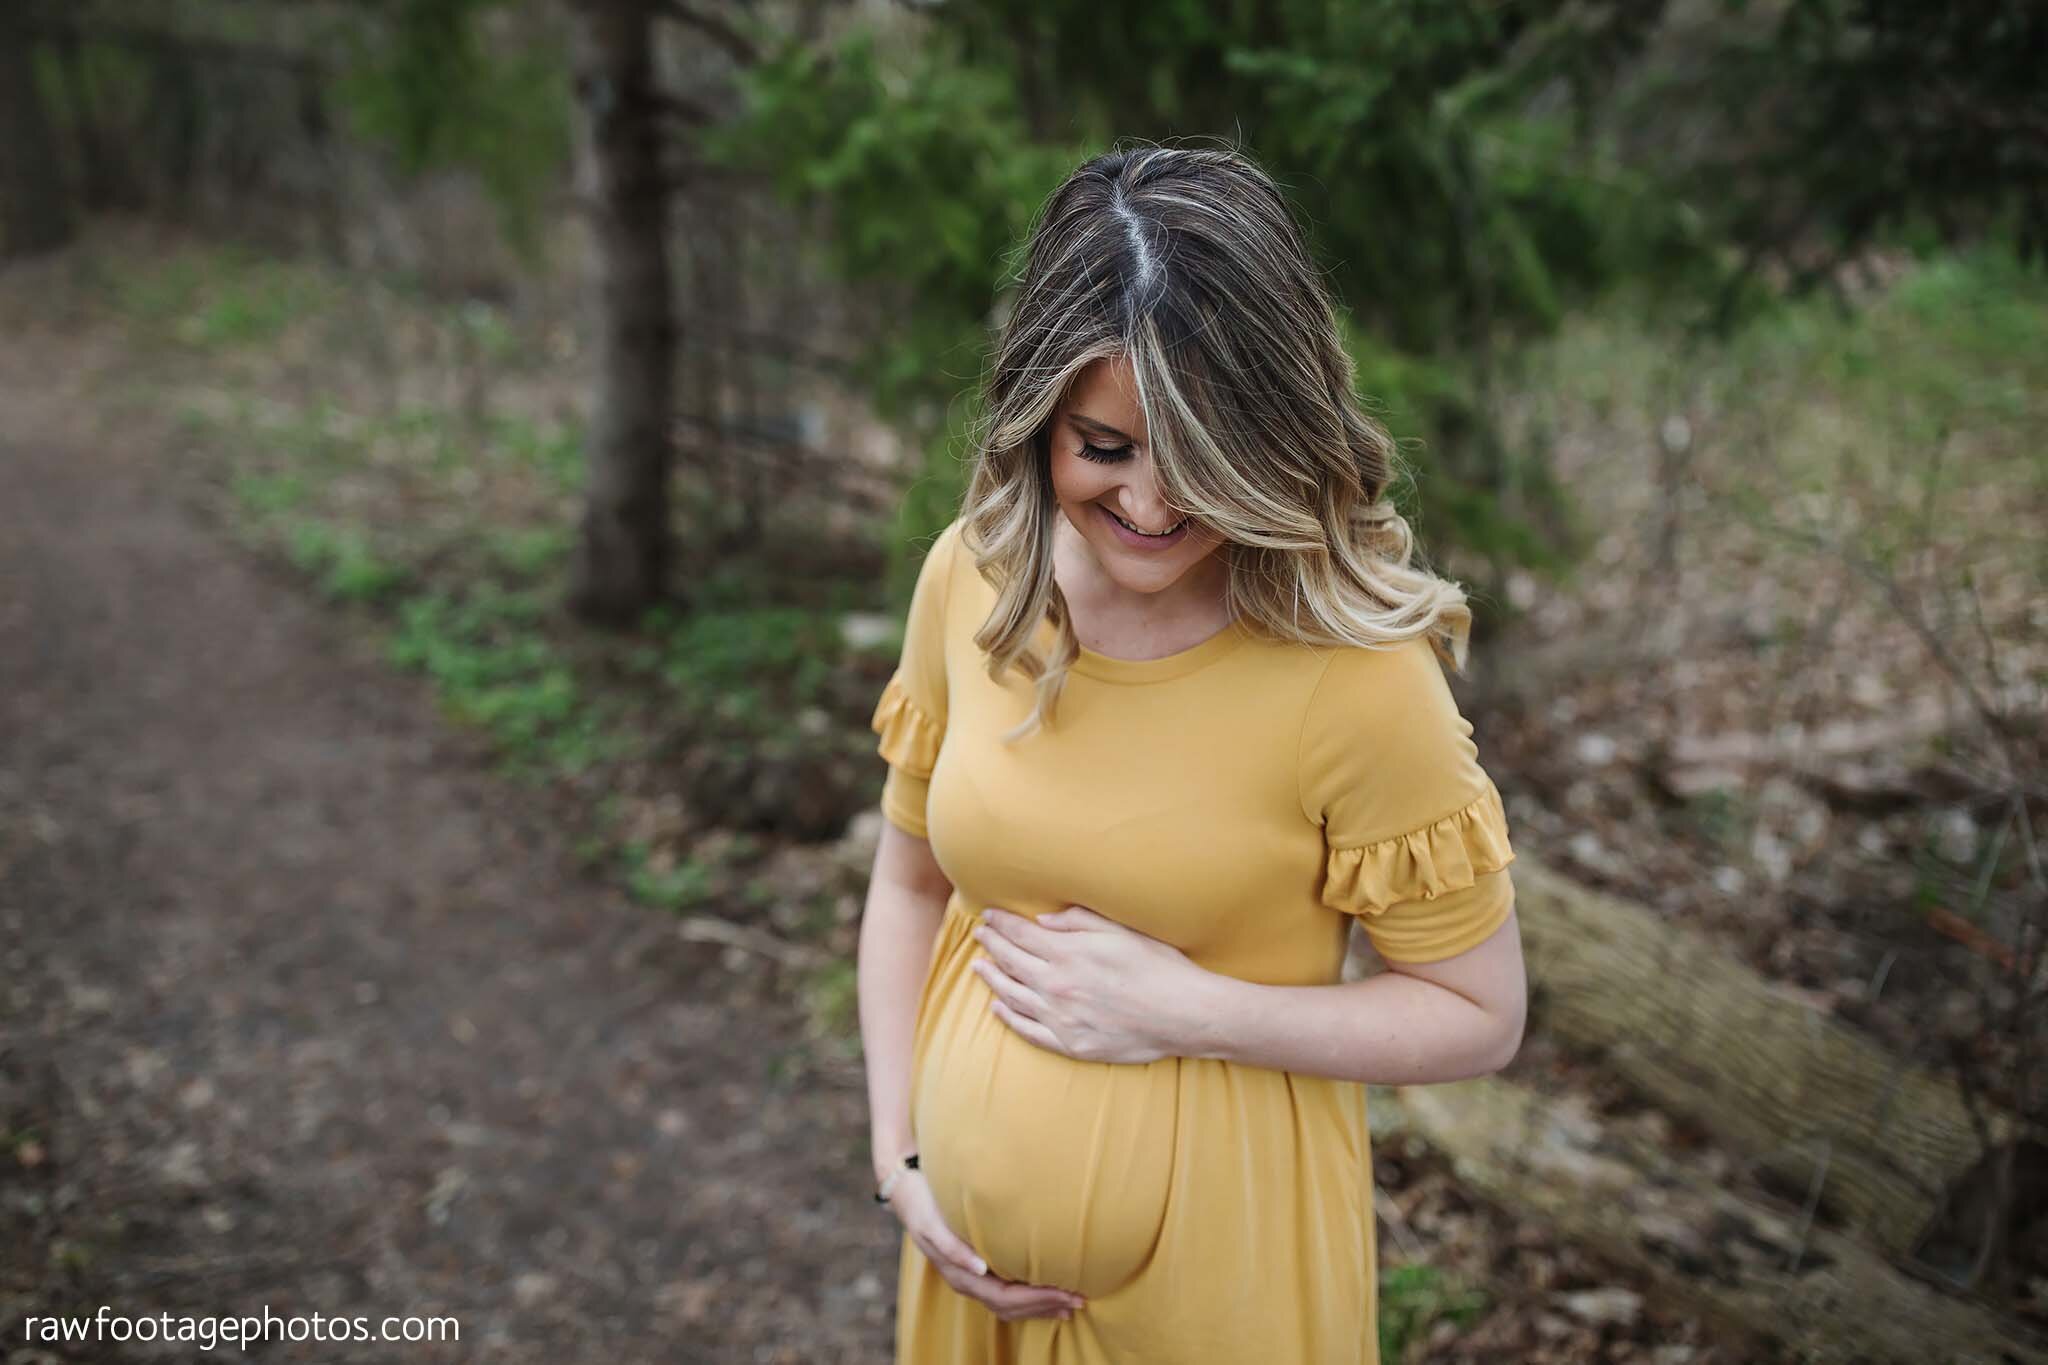 london_ontario_maternity_photographer-raw_footage_photography-in_home_lifestyle_maternity-forest_maternity_session-yellow_maternity_dress_034.jpg